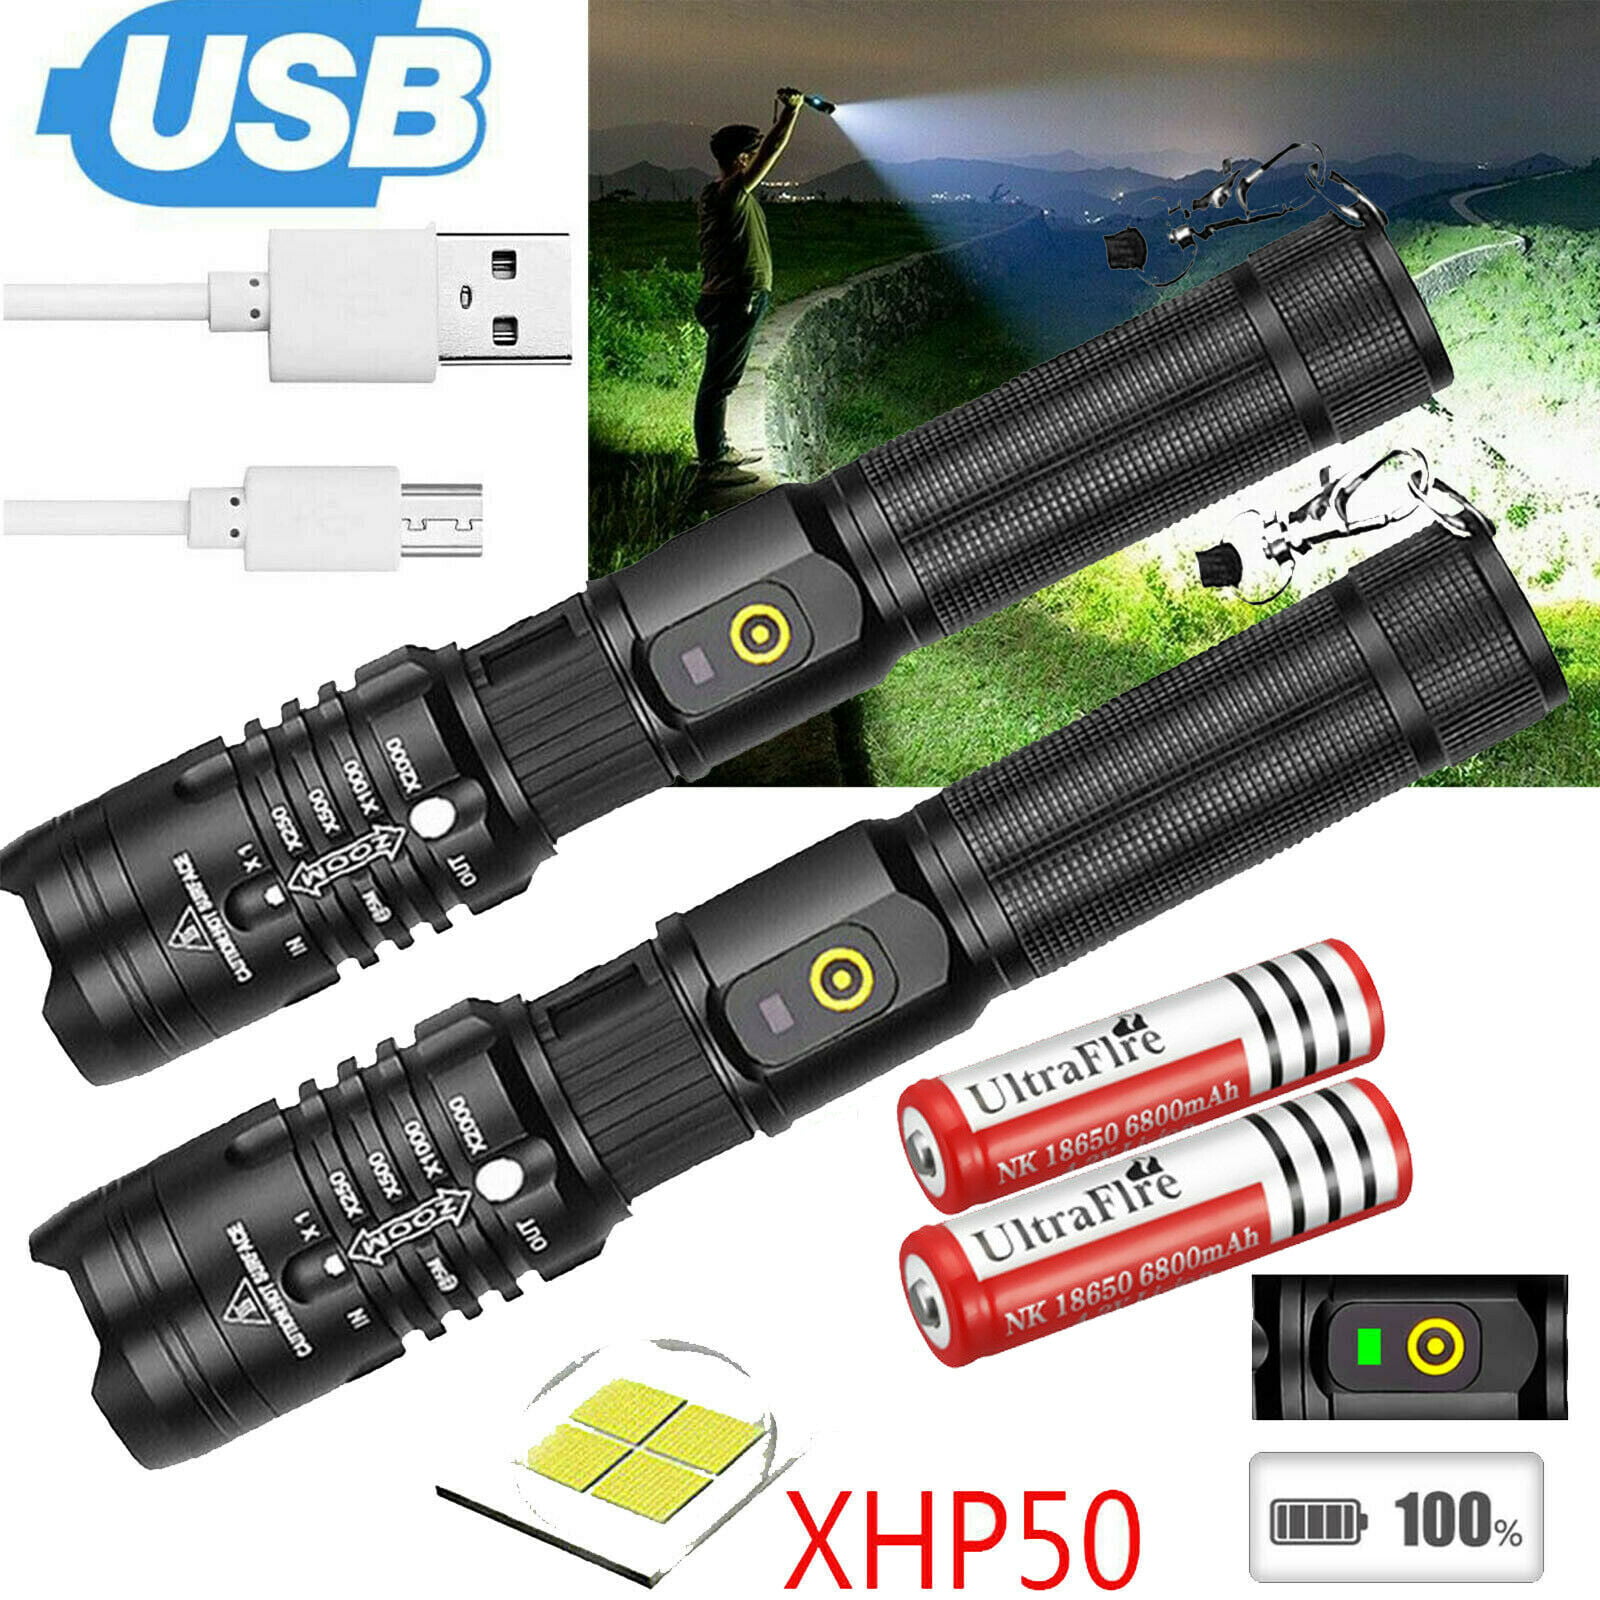 50000LM T6 Zoomable Tactical LED Flashlight Torch Lamp Super Bright Light 18650 